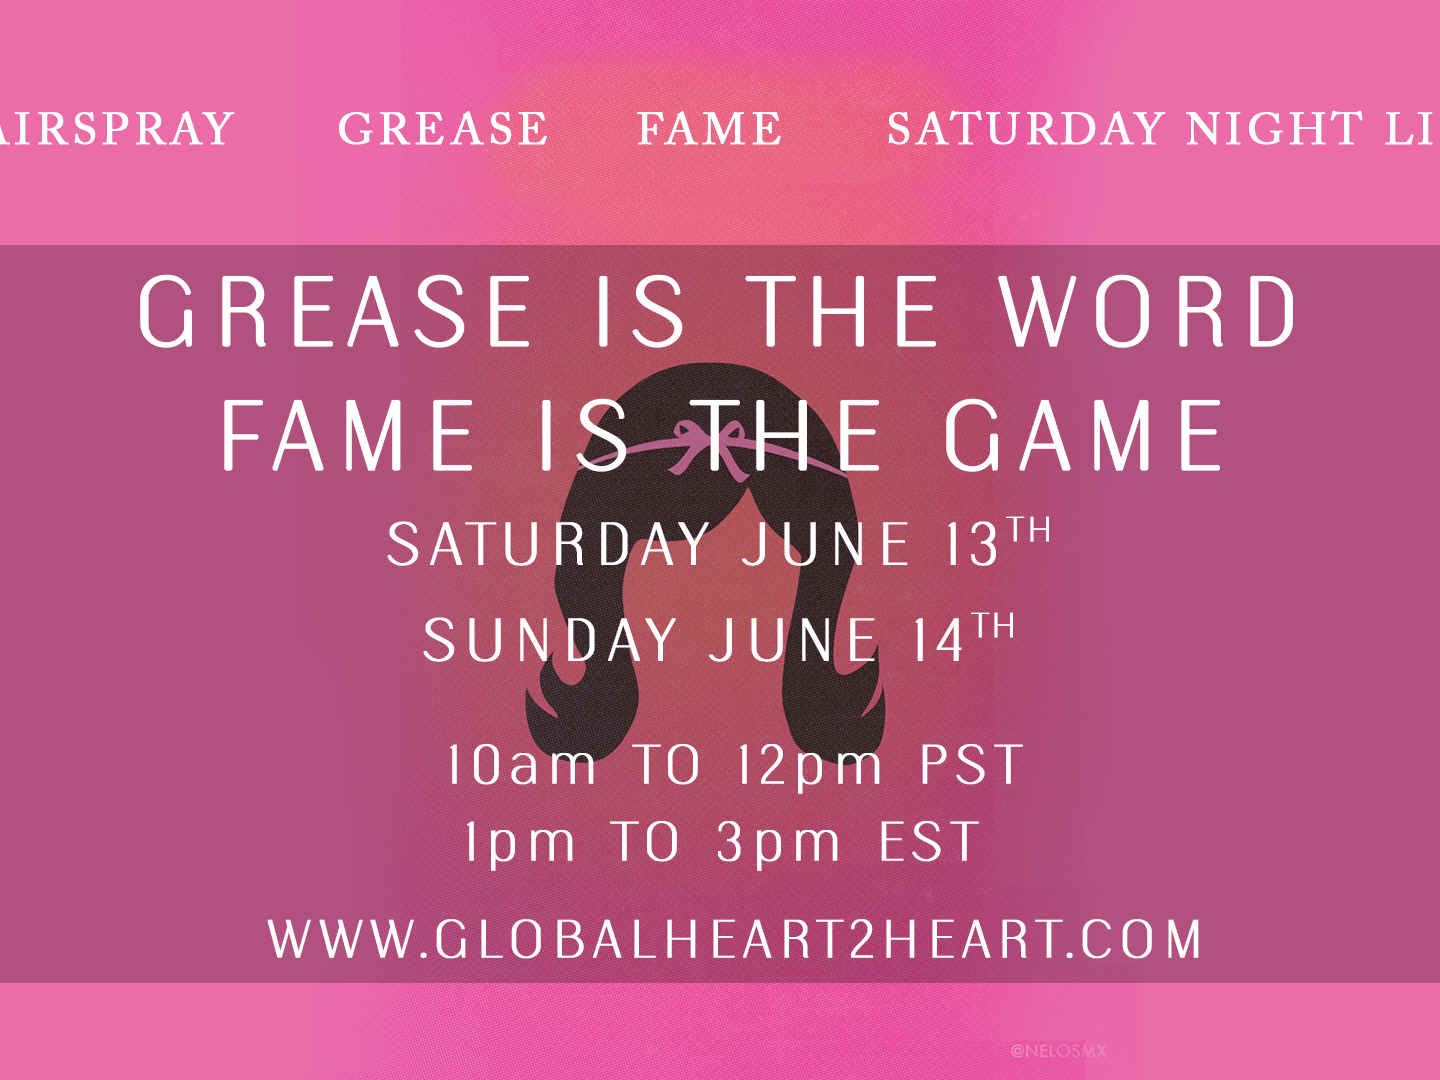 Grease is the Word Fame is the Game